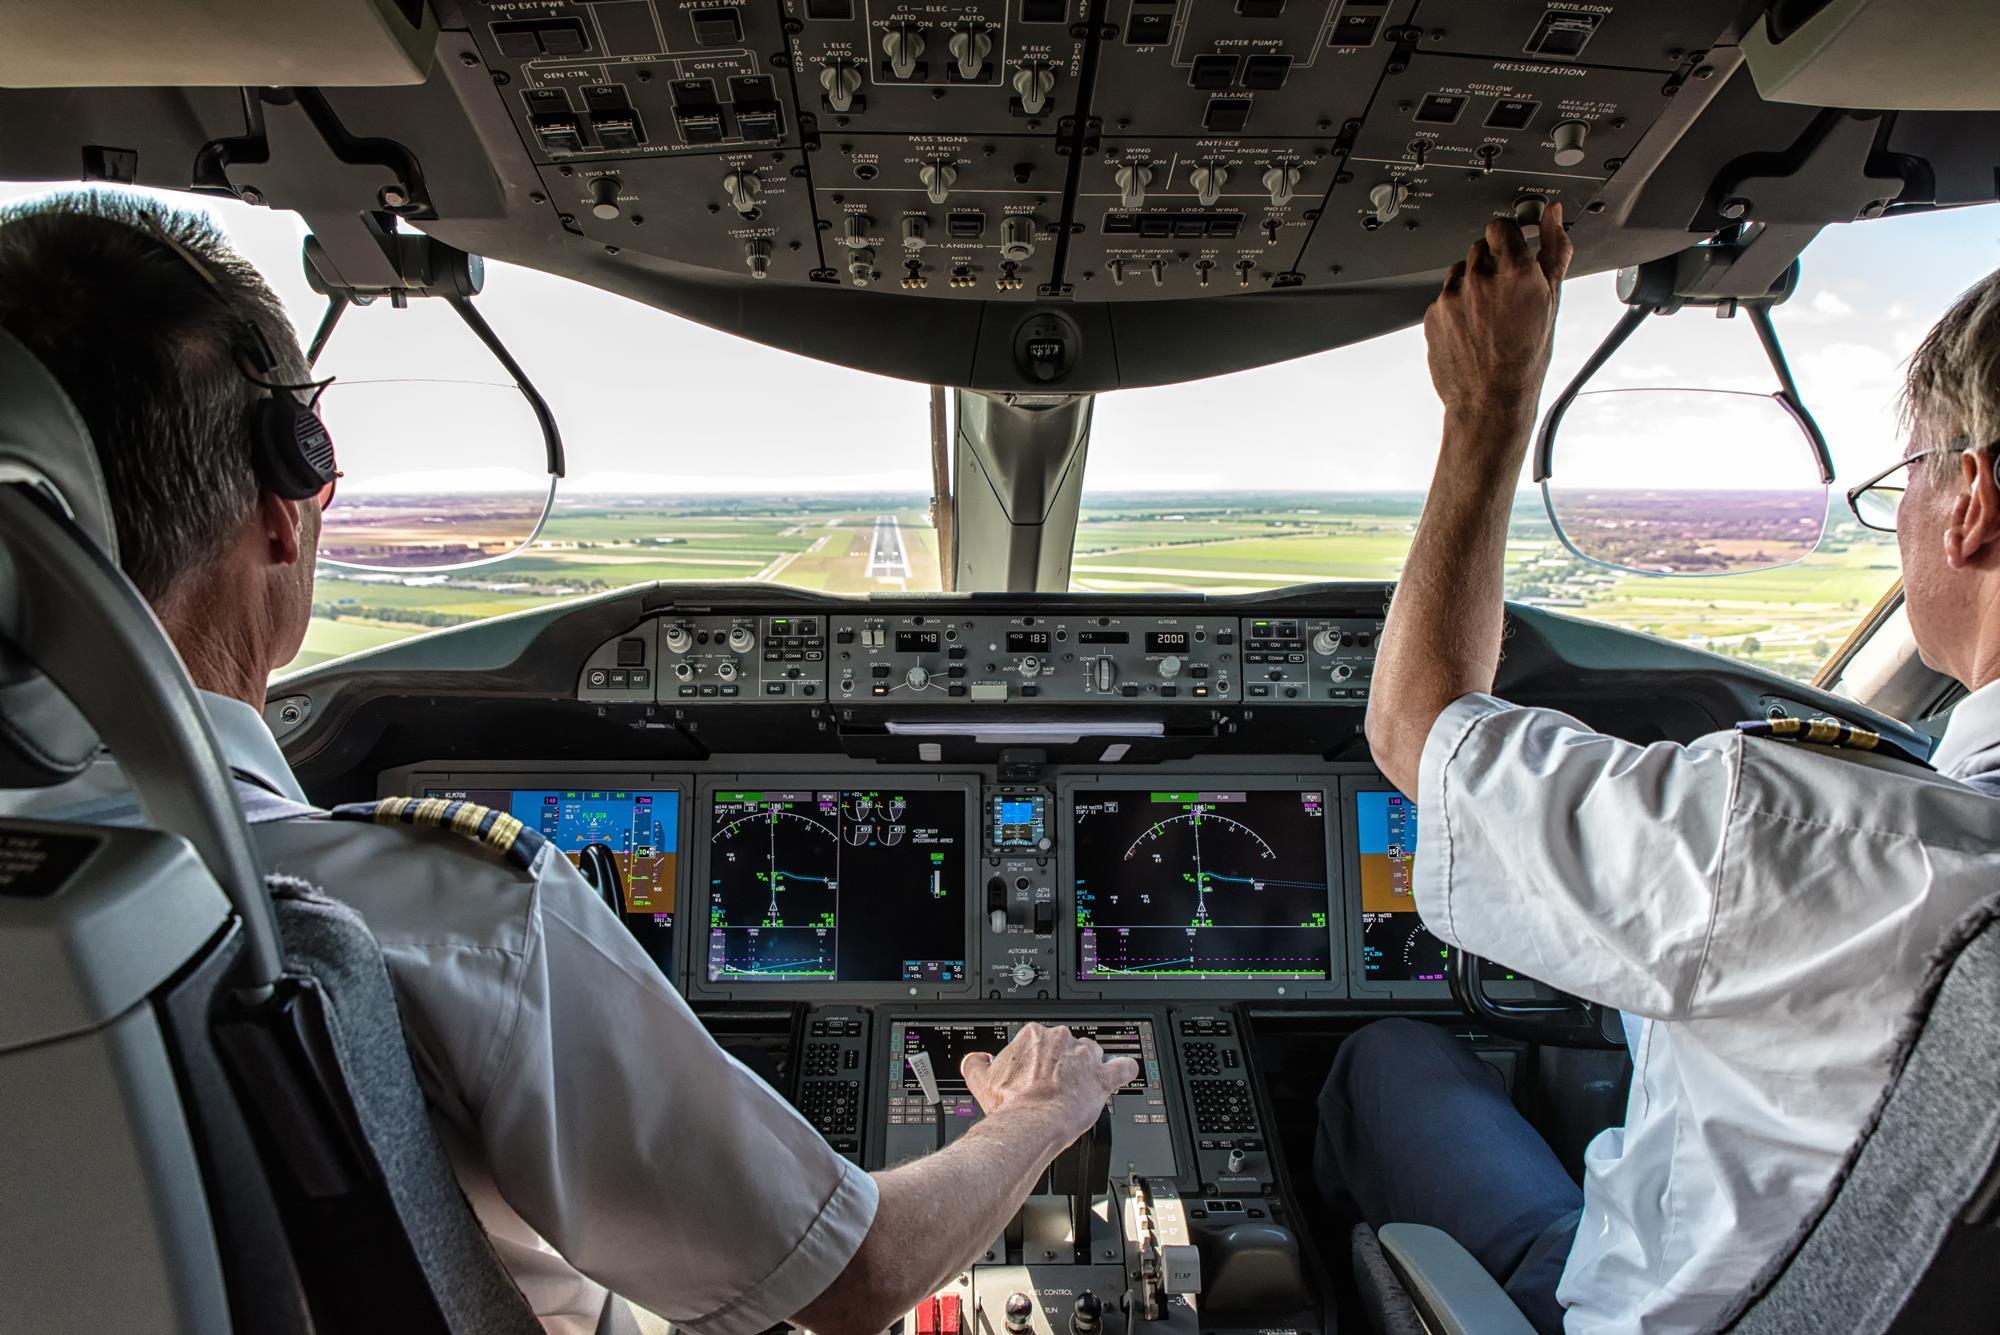 Will airlines change course and explore single-pilot operations